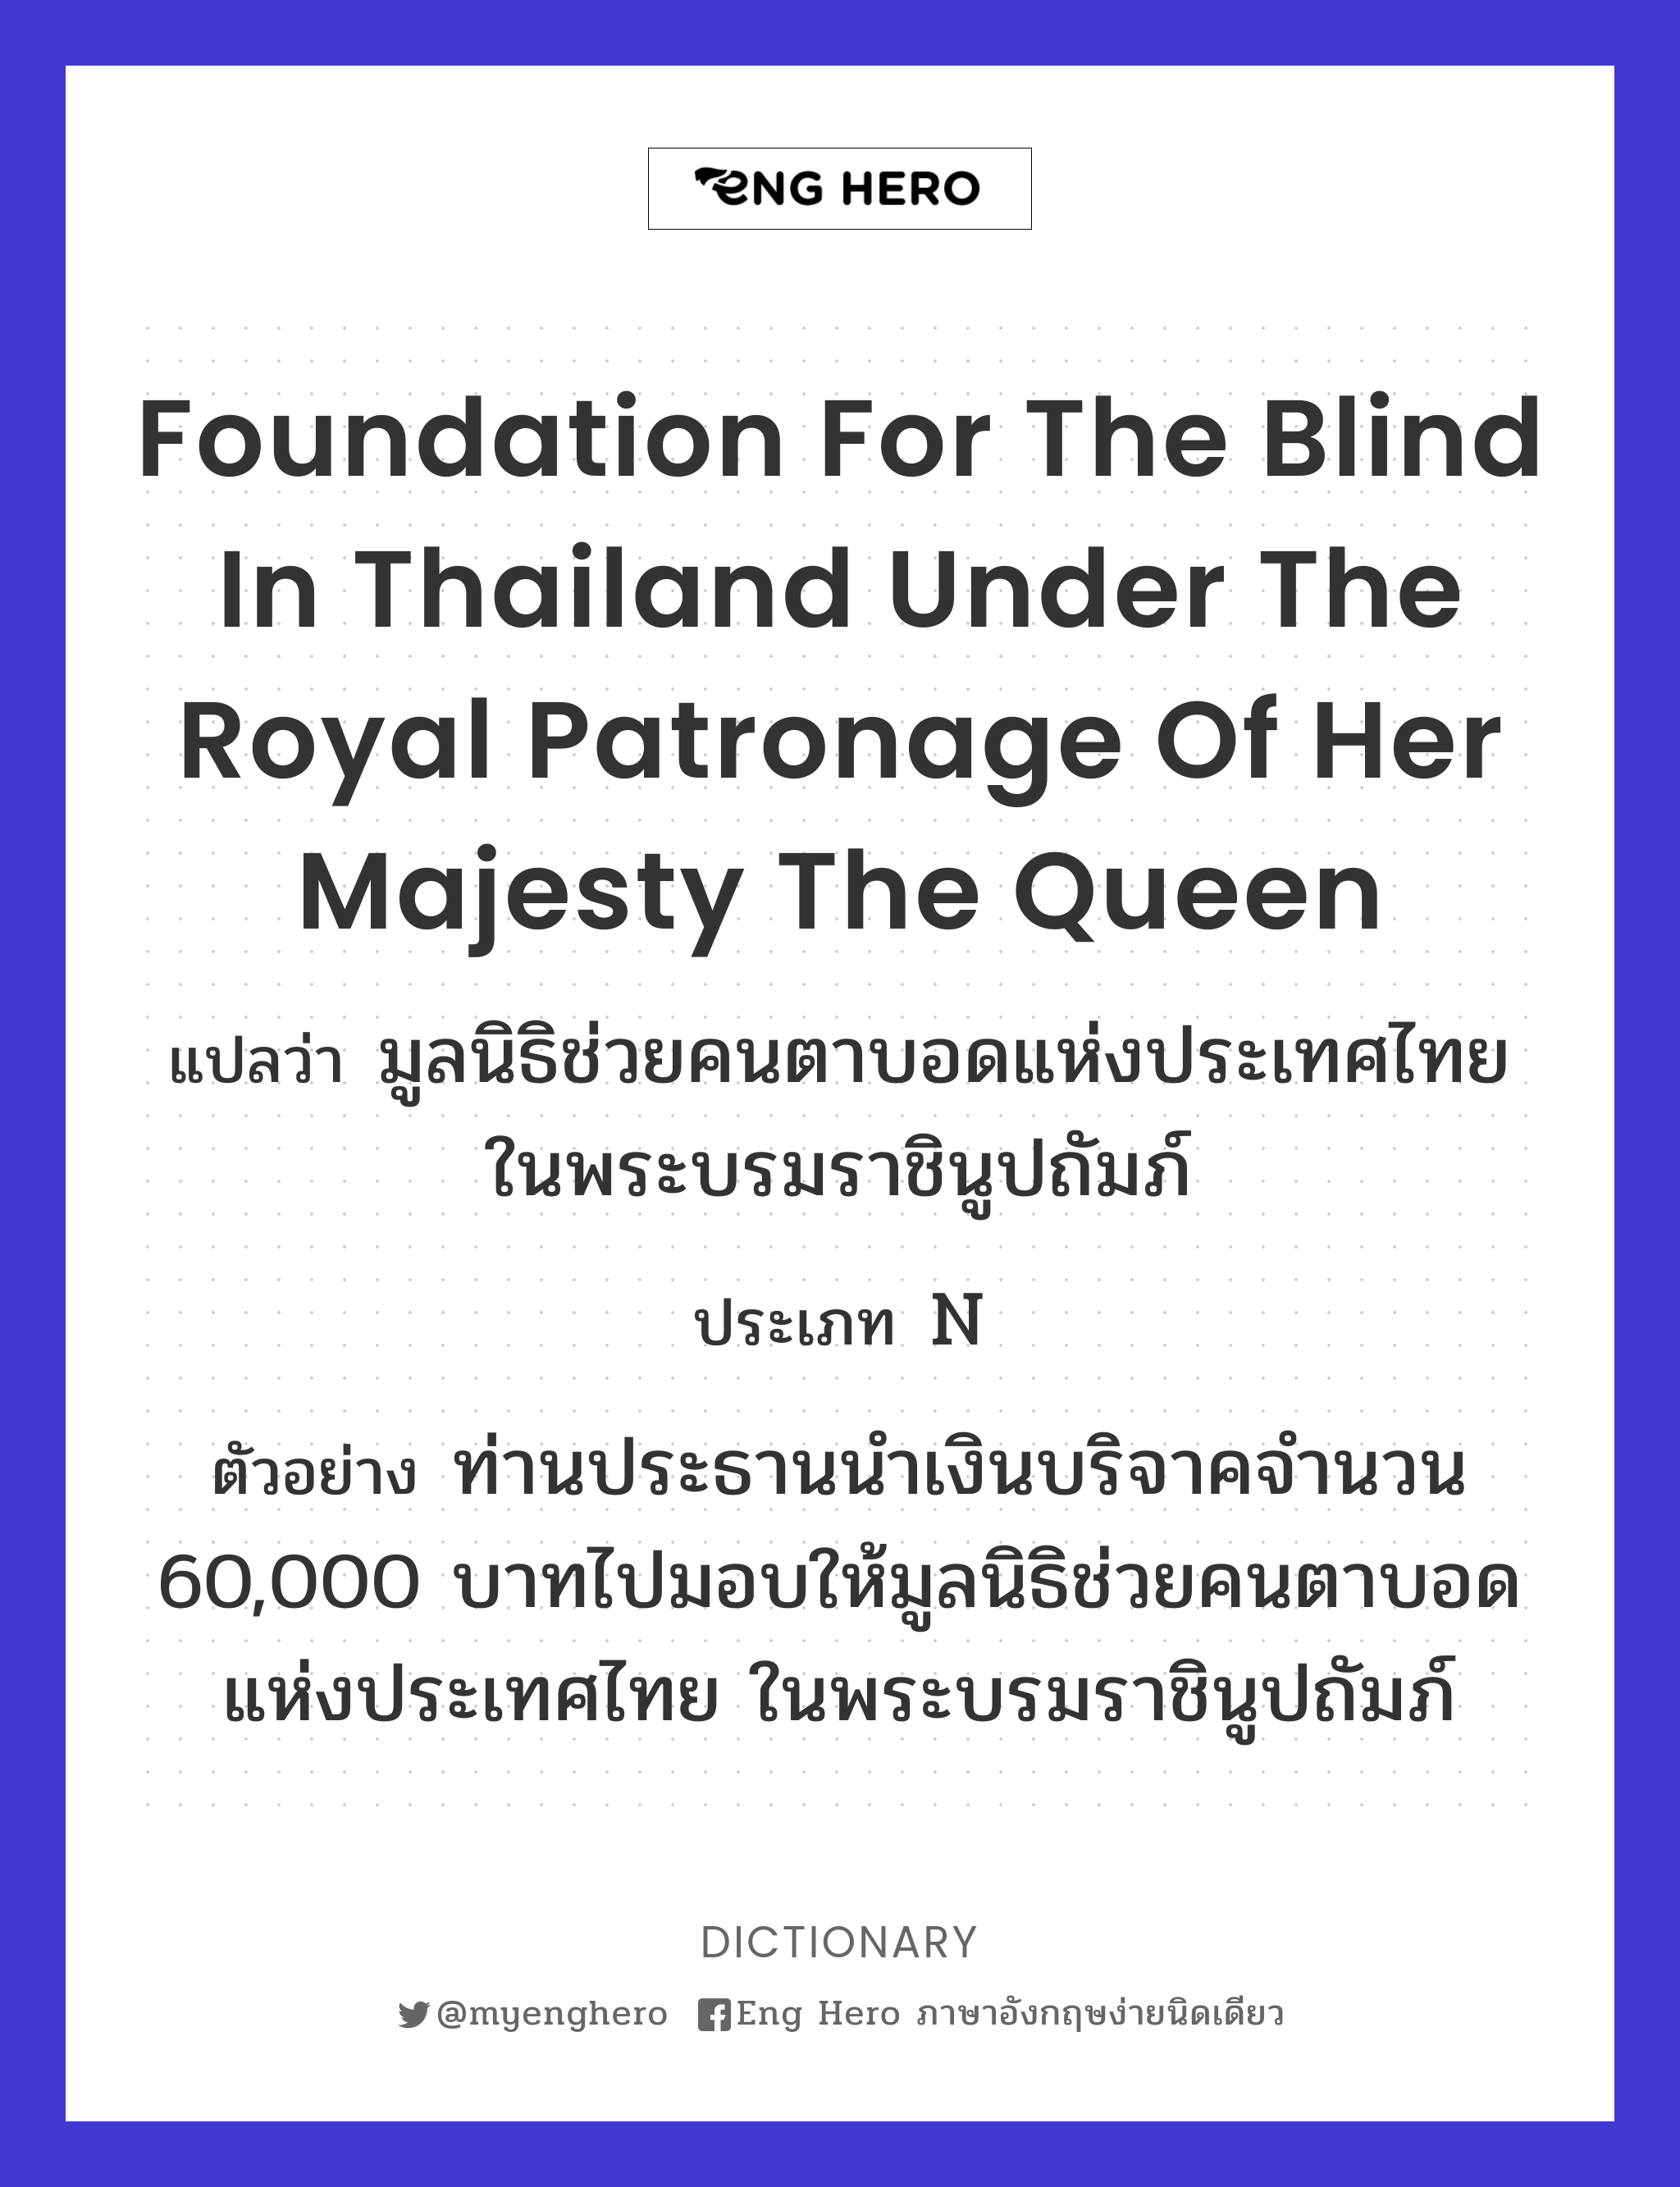 Foundation for the Blind in Thailand under the Royal Patronage of Her Majesty the Queen